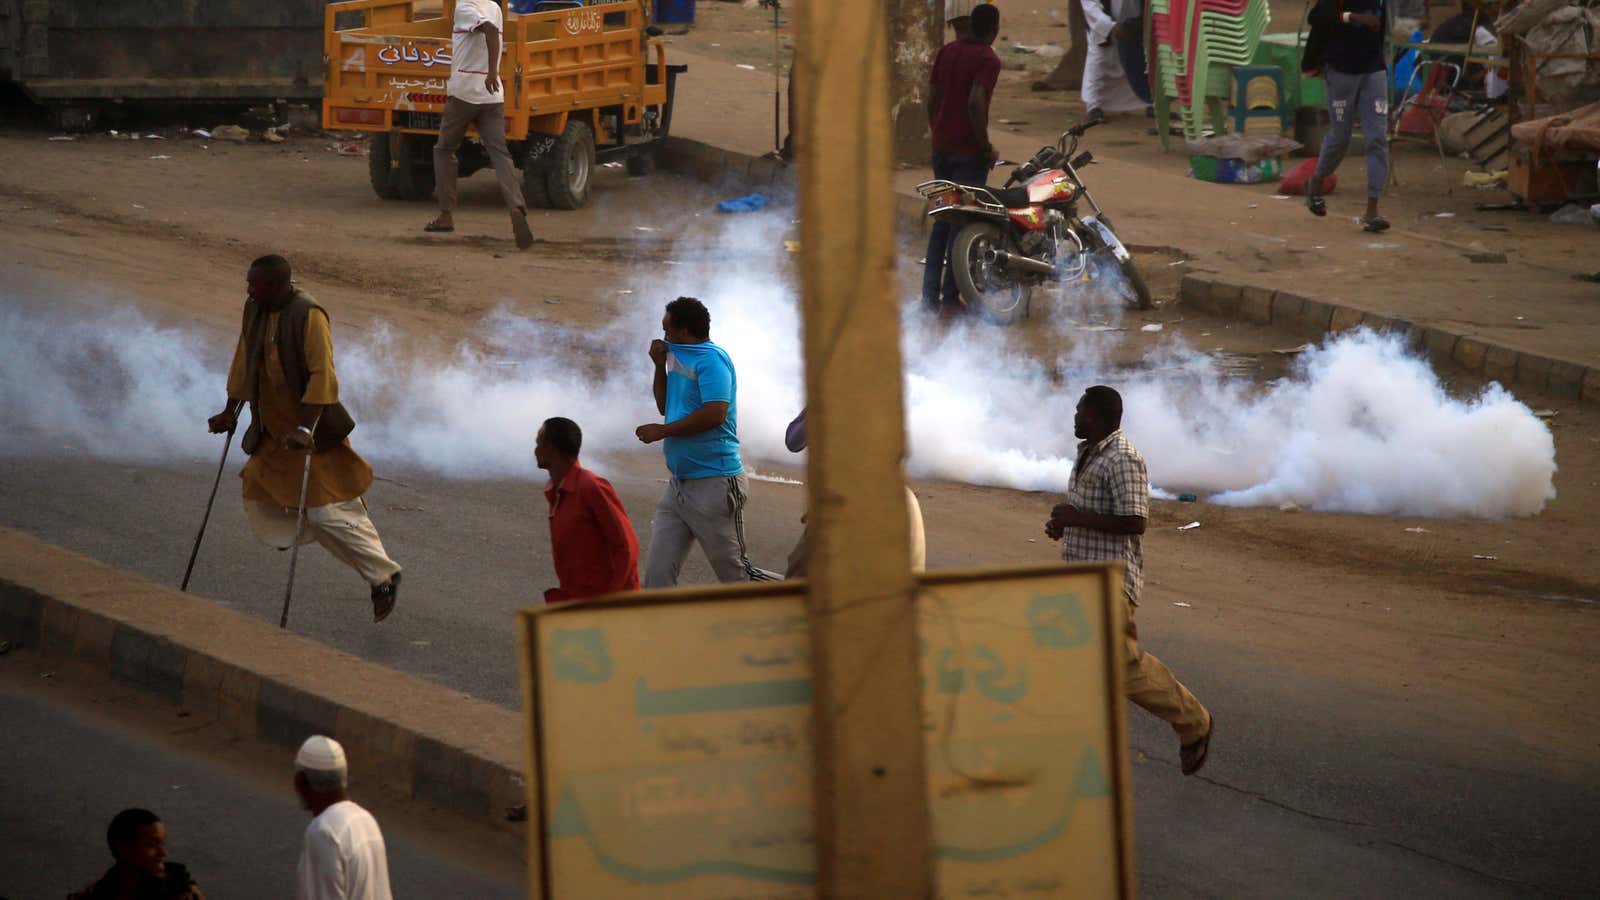 A tear gas canister fired to disperse Sudanese demonstrators, during anti-government protests in the outskirts of Khartoum, Sudan Jan. 15, 2019.